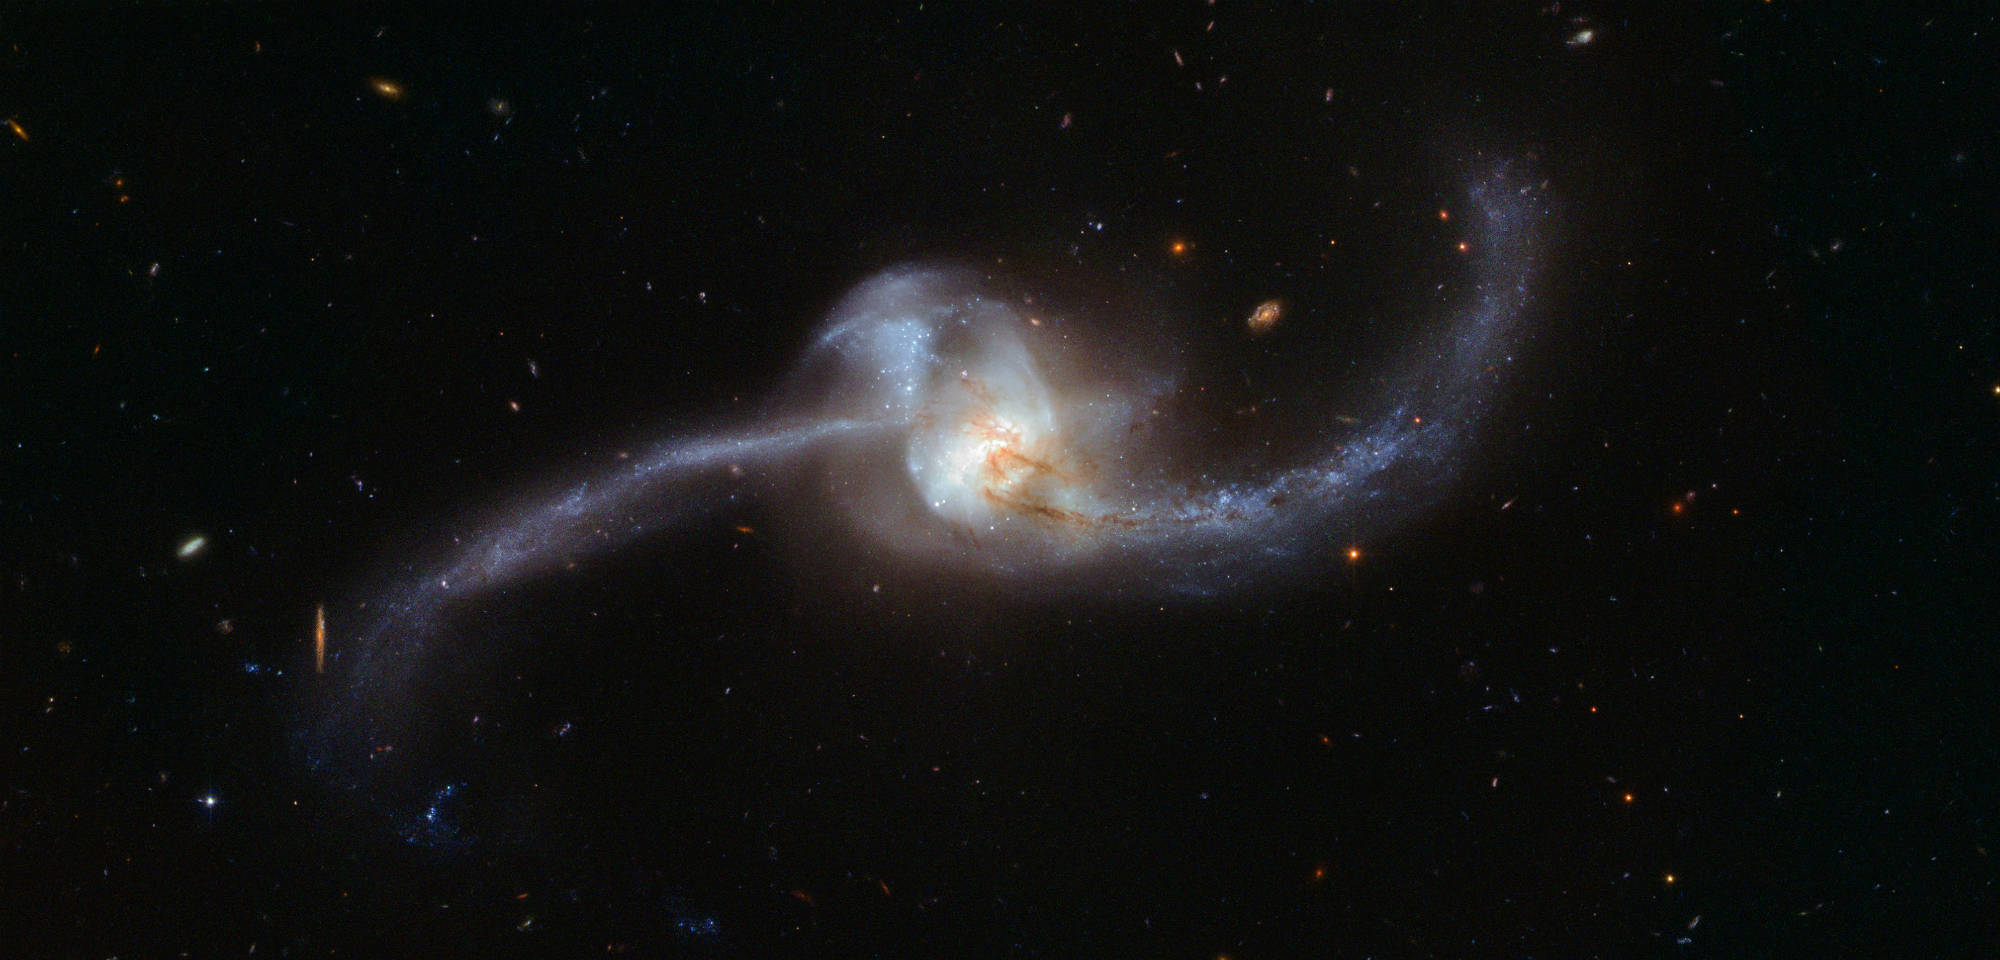 These Photos From the Hubble Space Telescope Show Two Galaxies Colliding in Spectacular Fashion